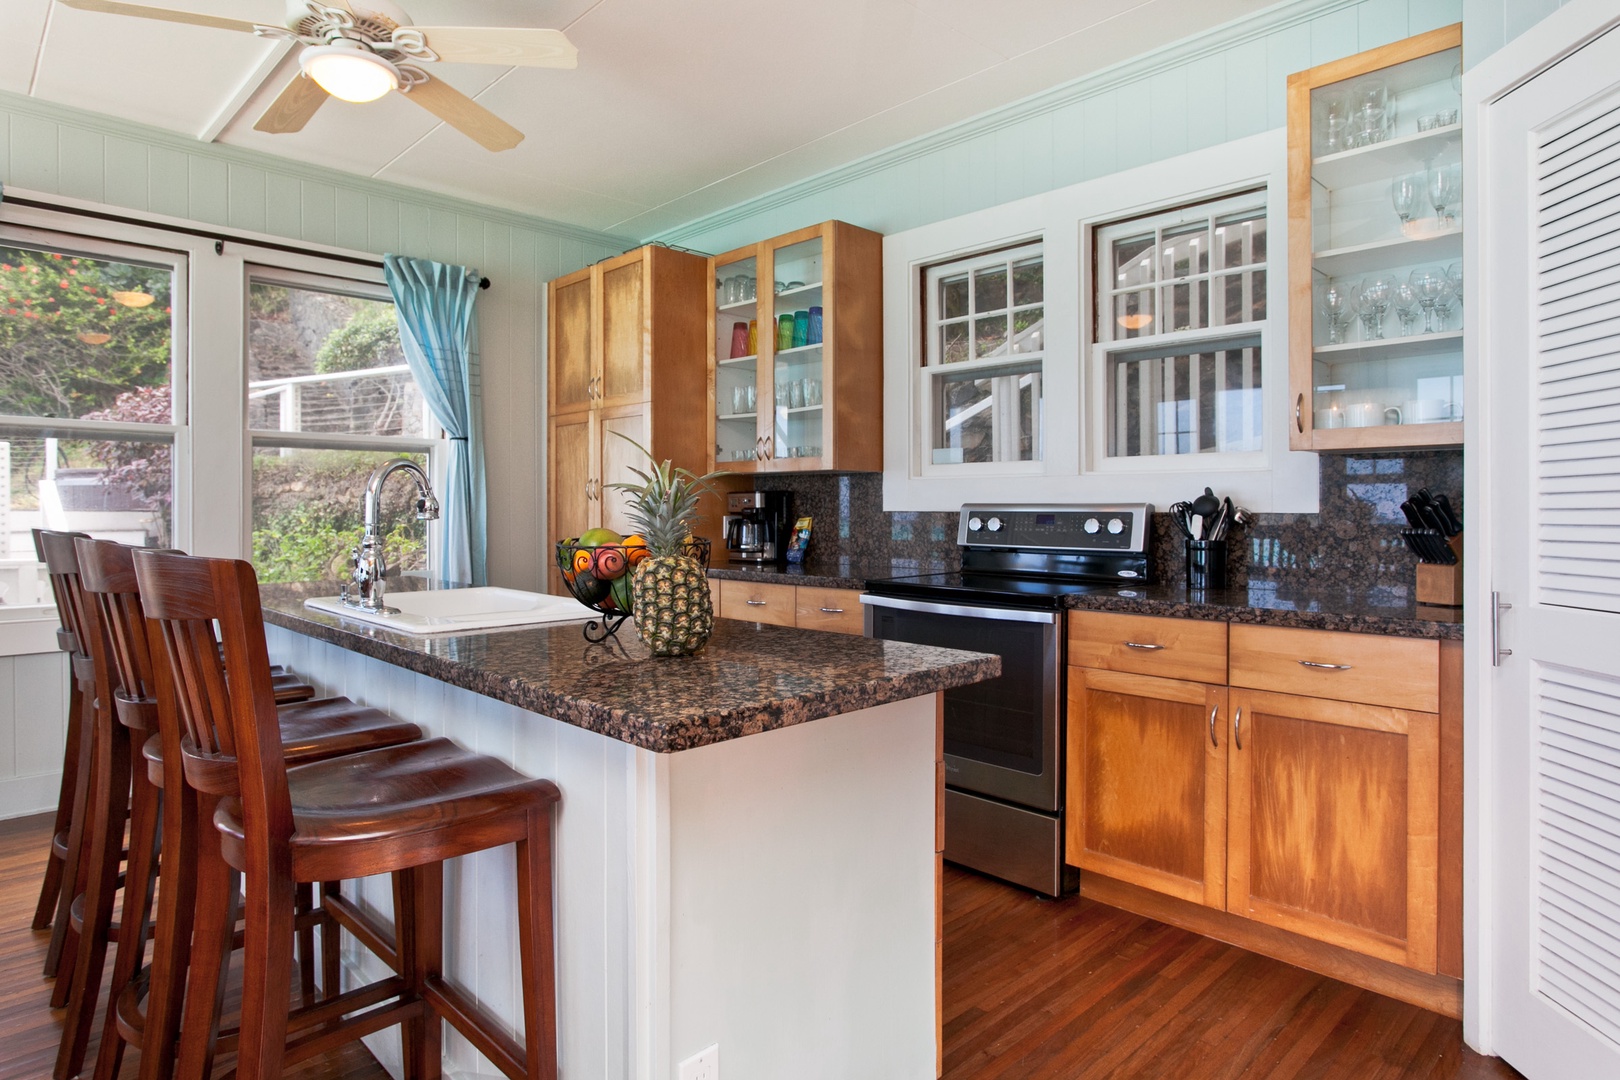 Kailua Vacation Rentals, Hale Mahina Lanikai* - Breakfast bar for four, a casual and convenient spot for morning meals or a quick coffee.